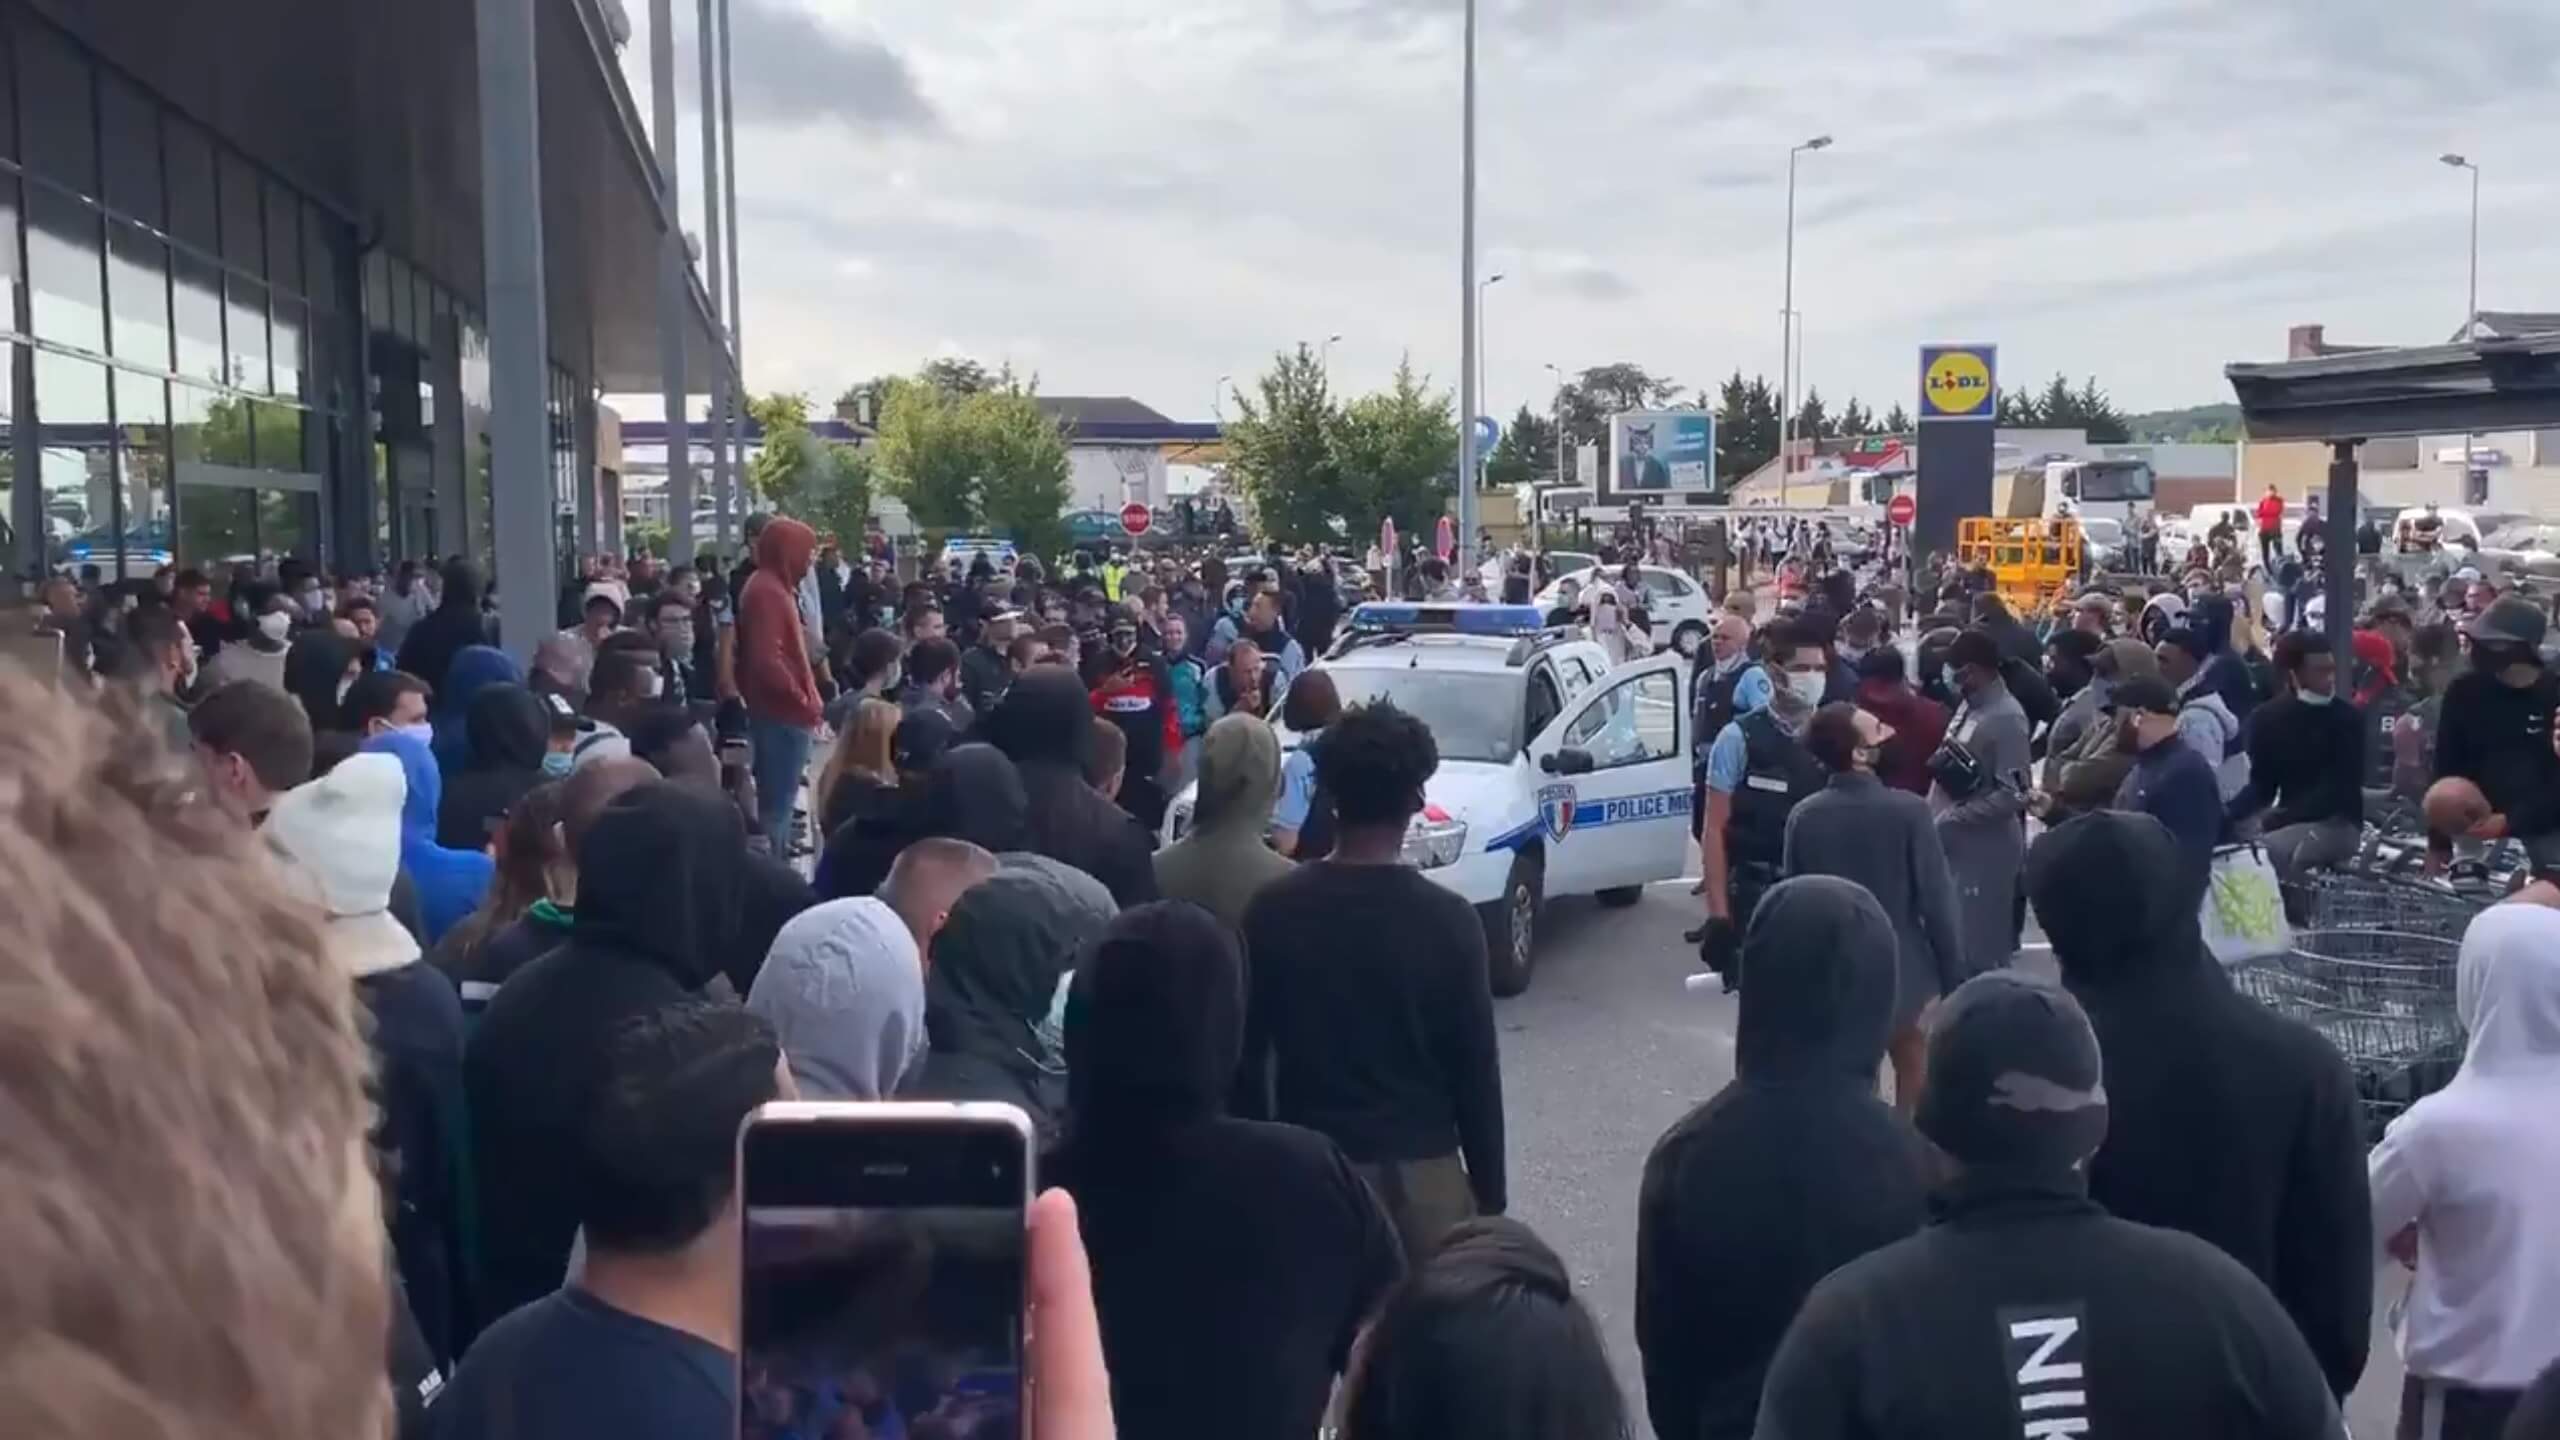 French PS4 sale leads to rowdy crowds being pepper sprayed by police